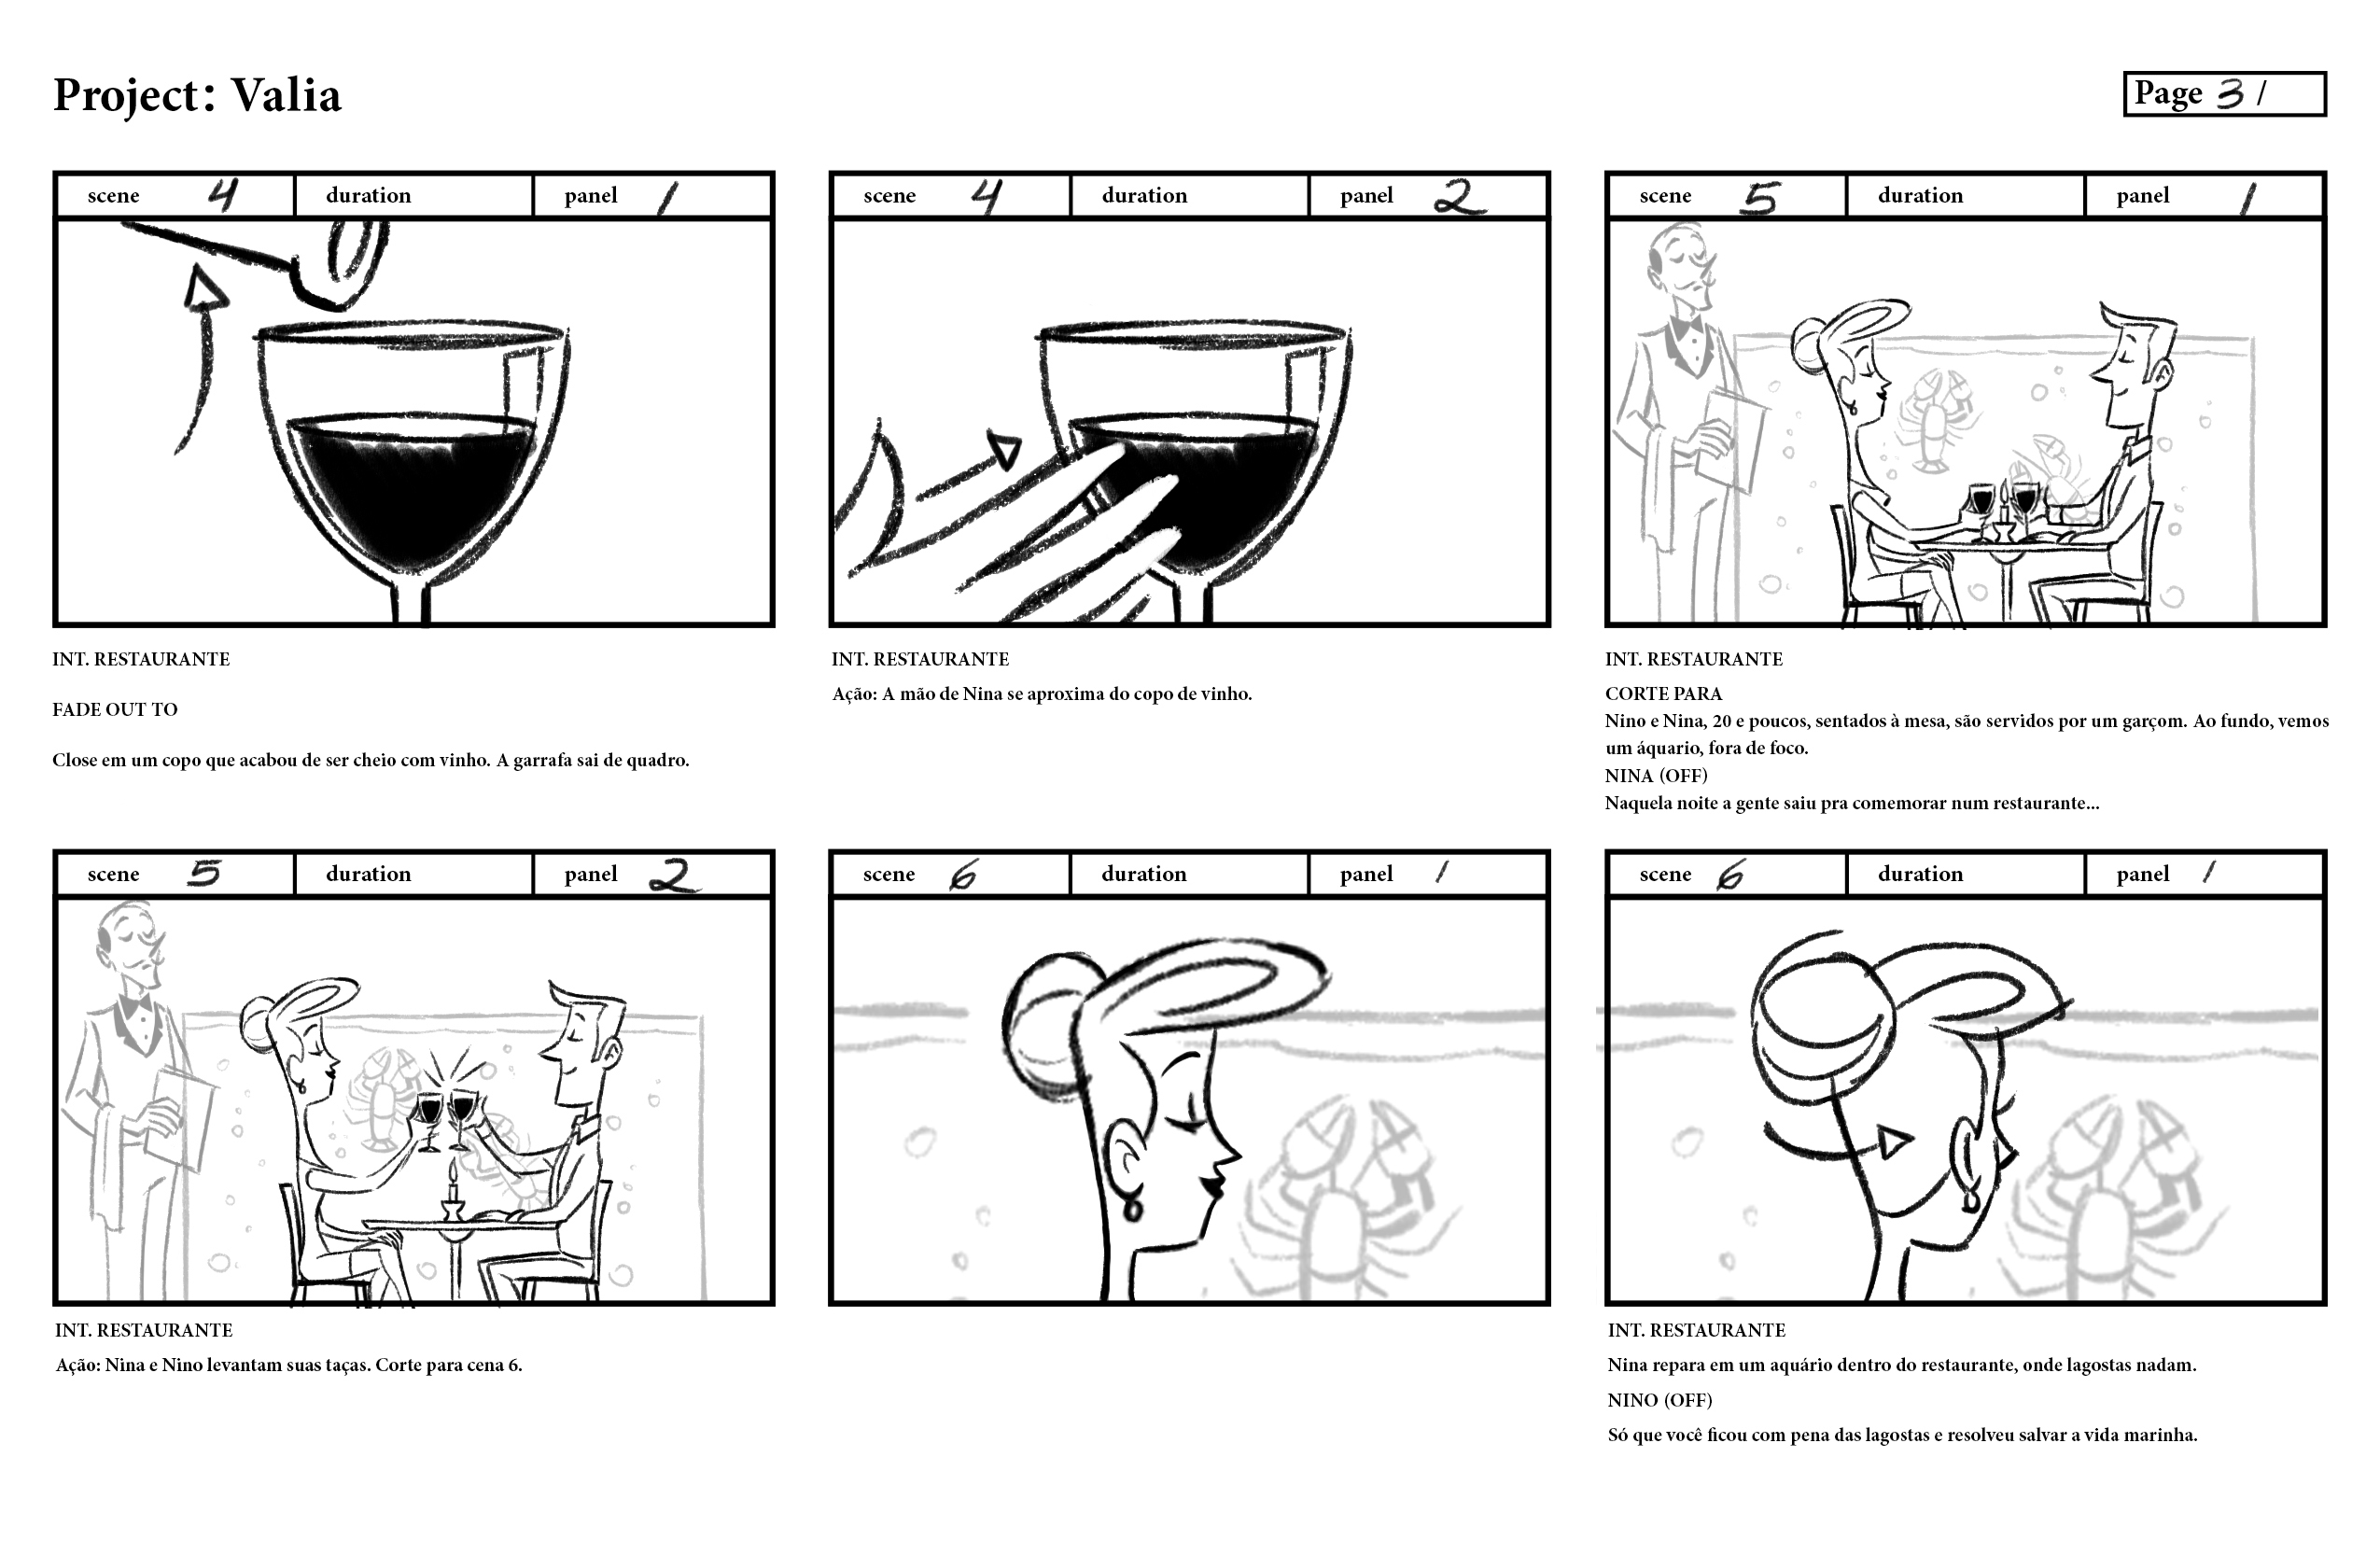 storyboard for a private insurance plan, to be animated with motion graphics